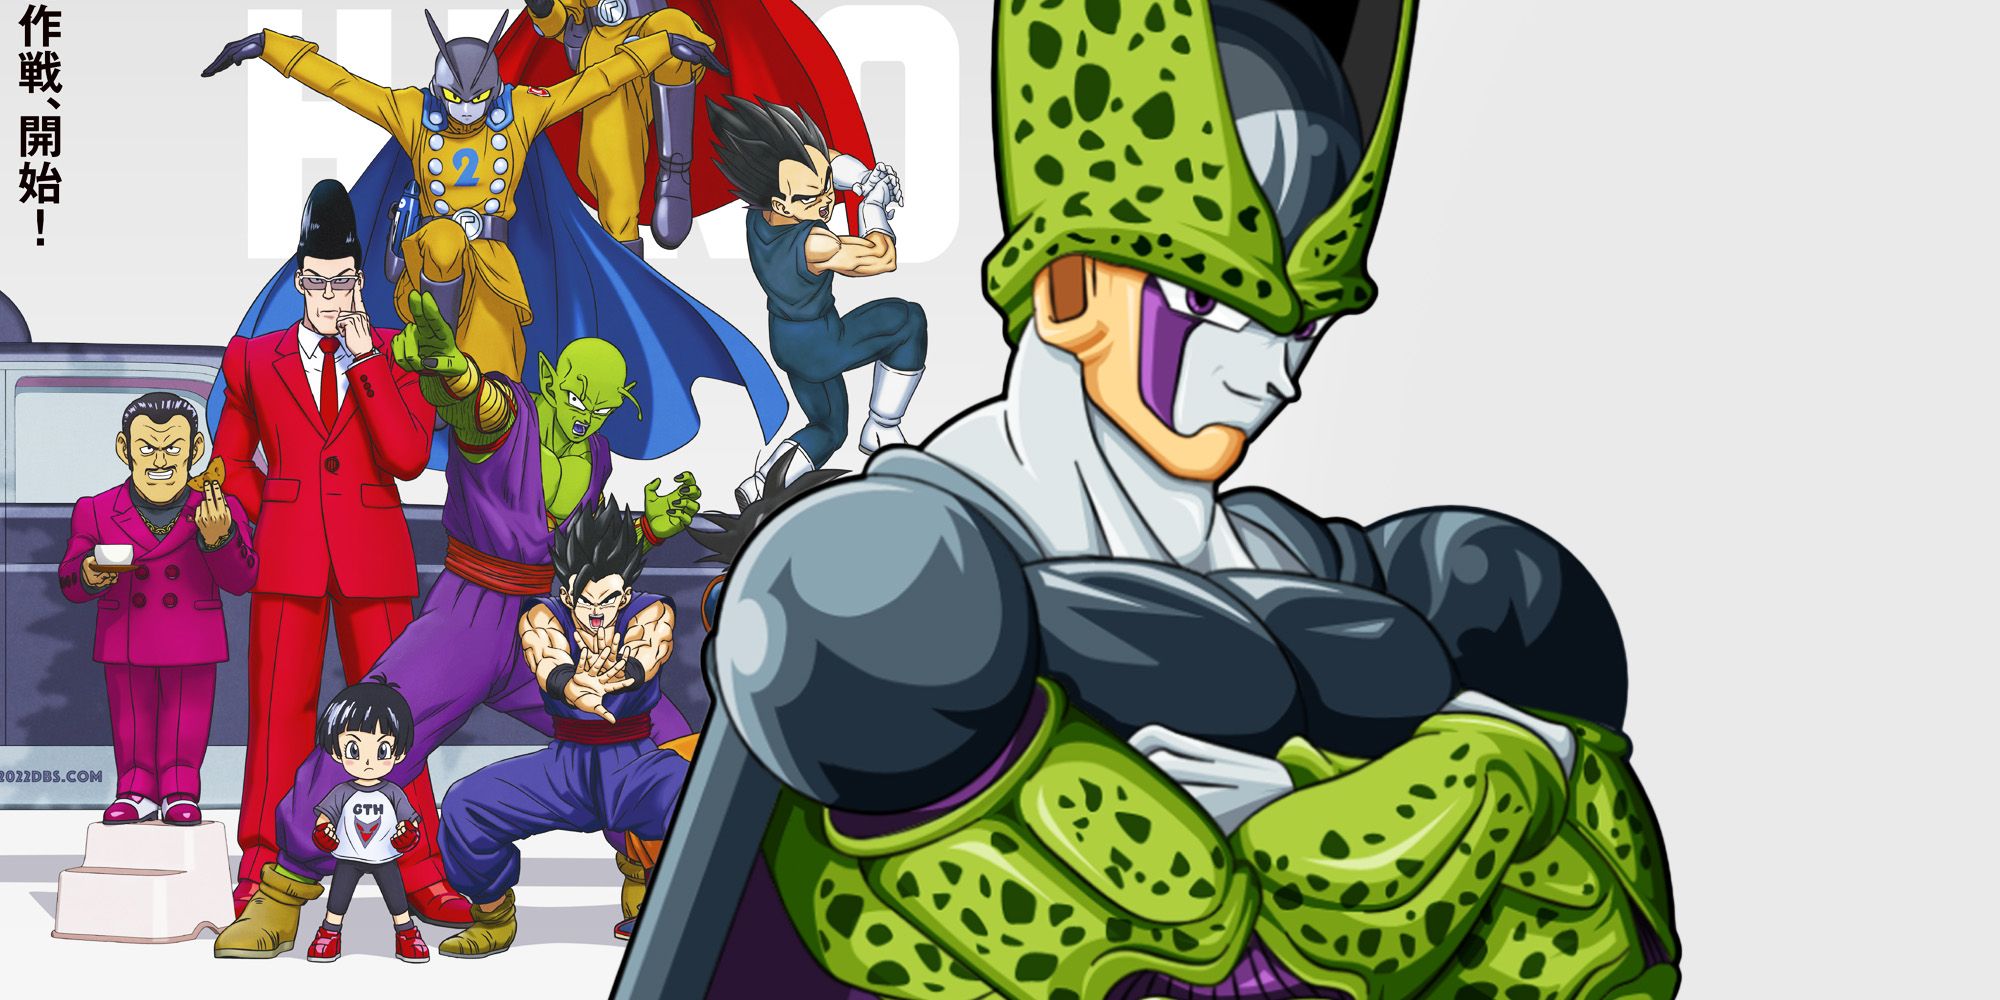 Dragon Ball Super: Super Hero's poster and Perfect Cell